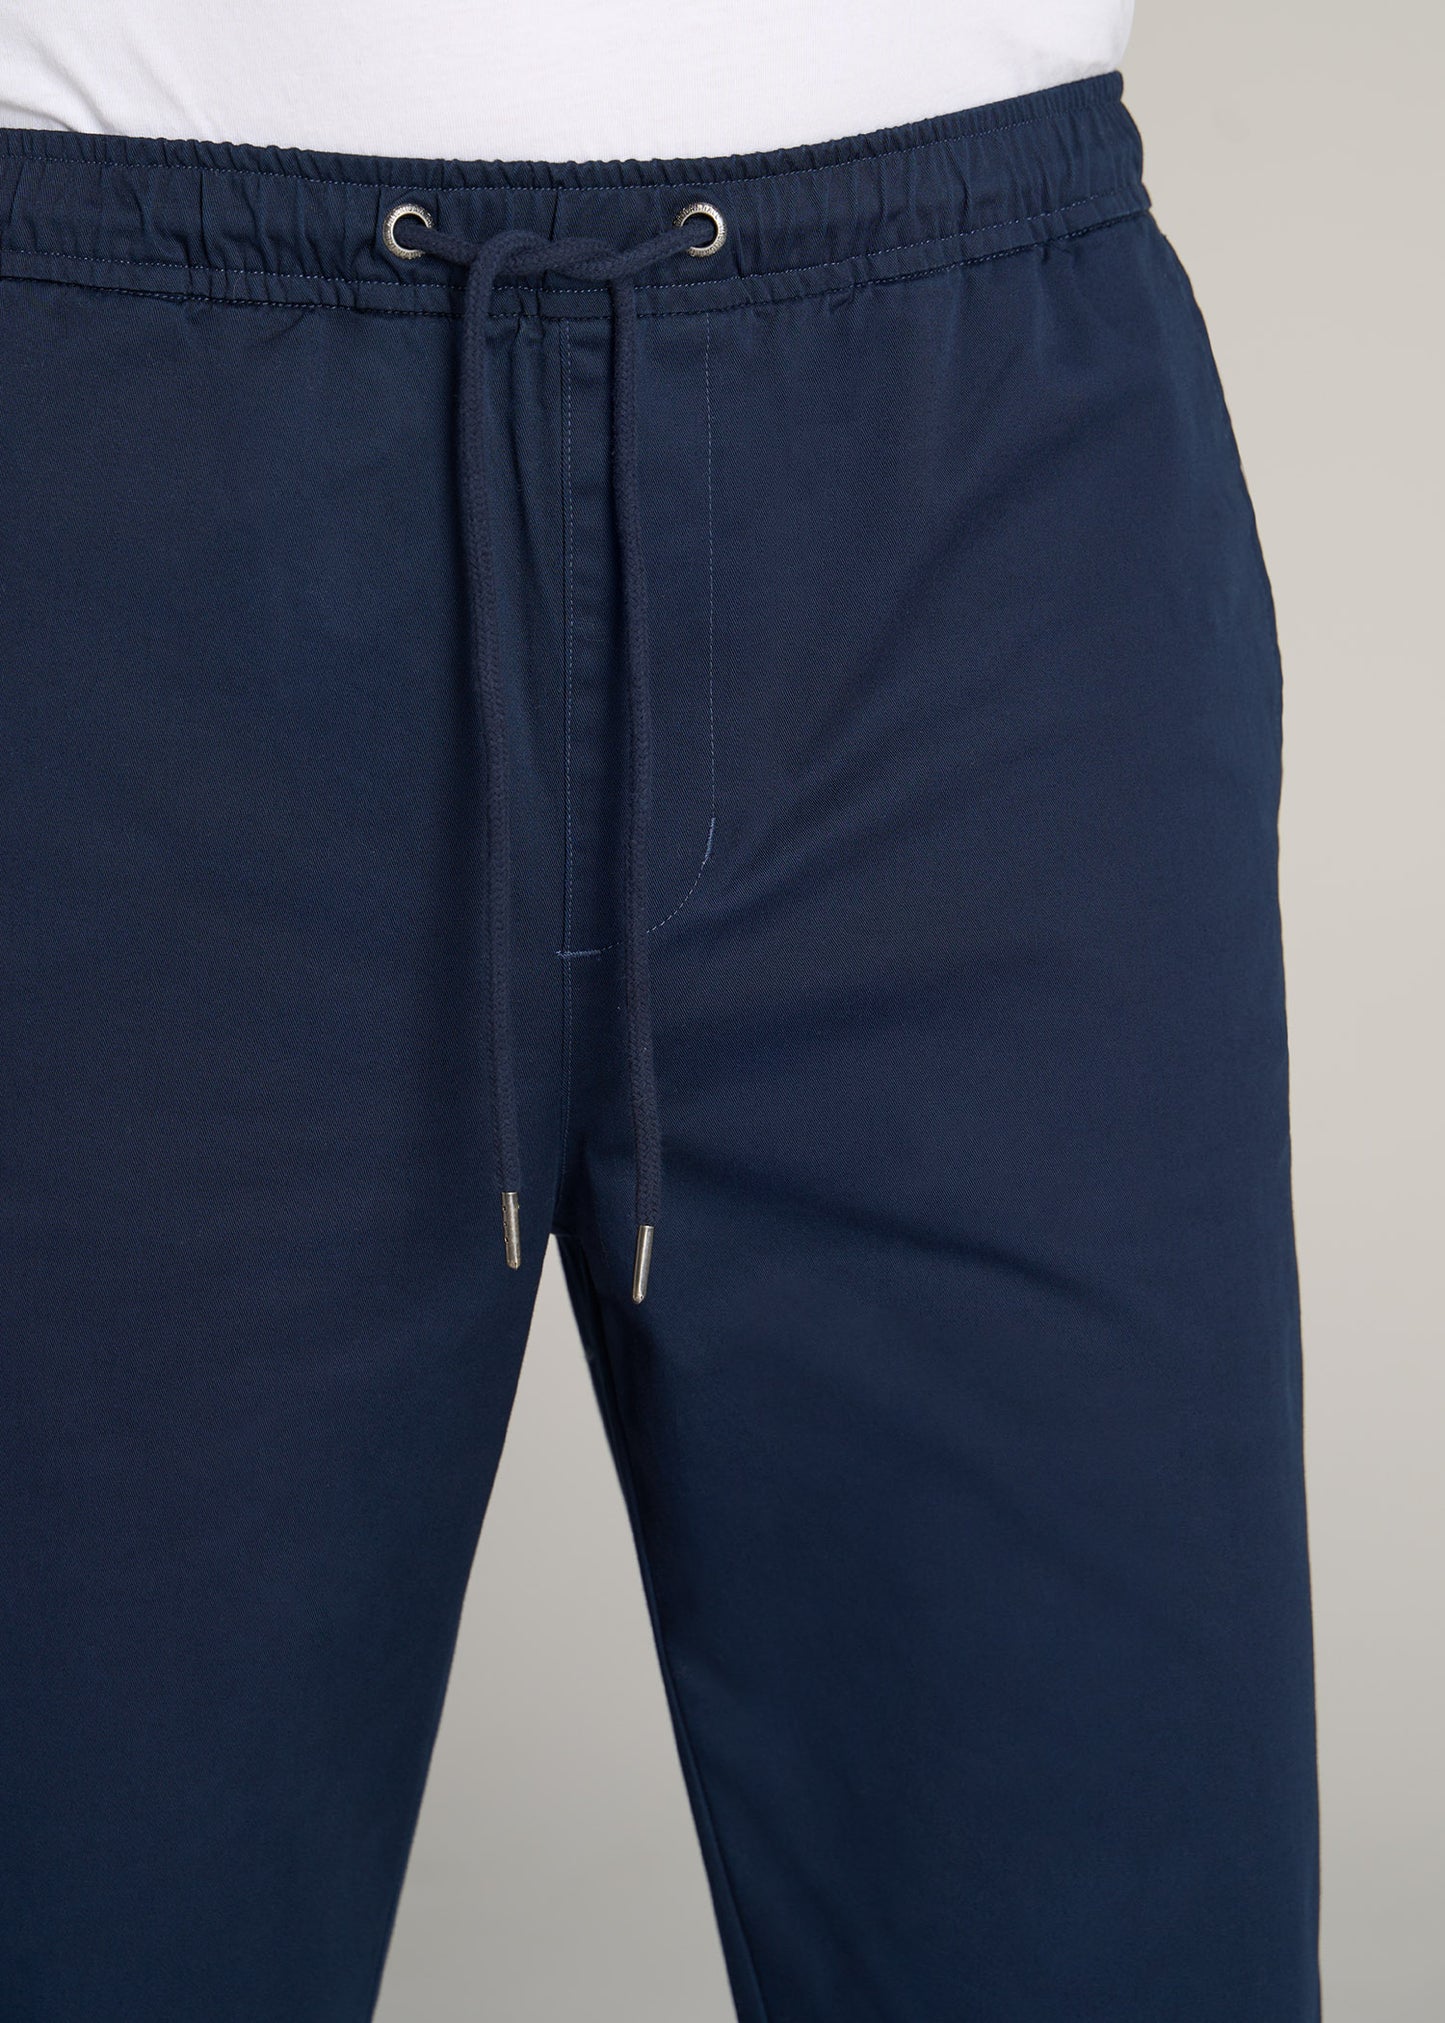 American-Tall-Men-Pull-On-Deck-Stretch-Pants-Navy-detail